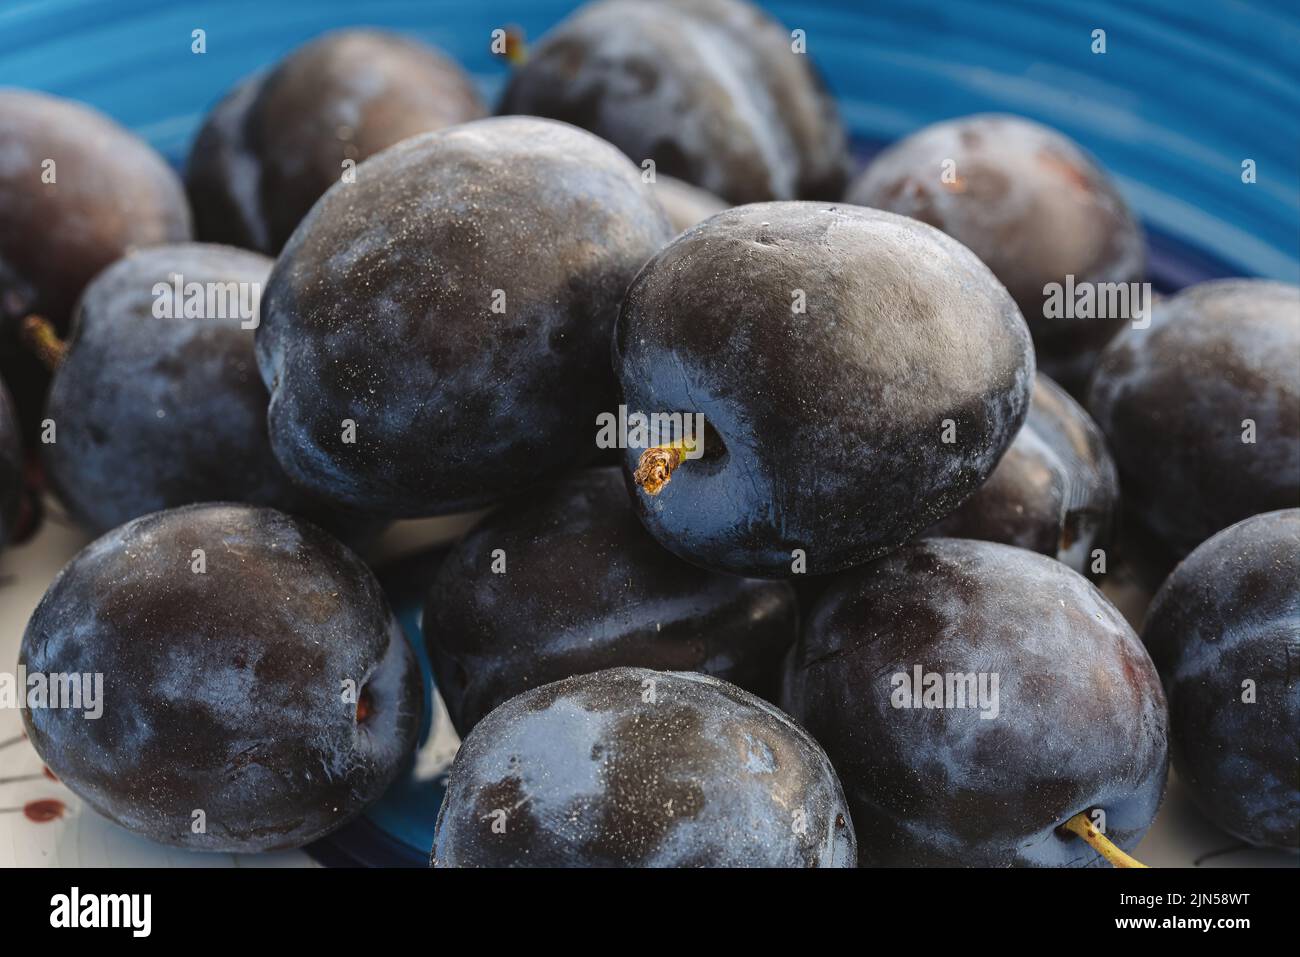 close-up view of fresh ripe sugar plums in pottery bowl Stock Photo